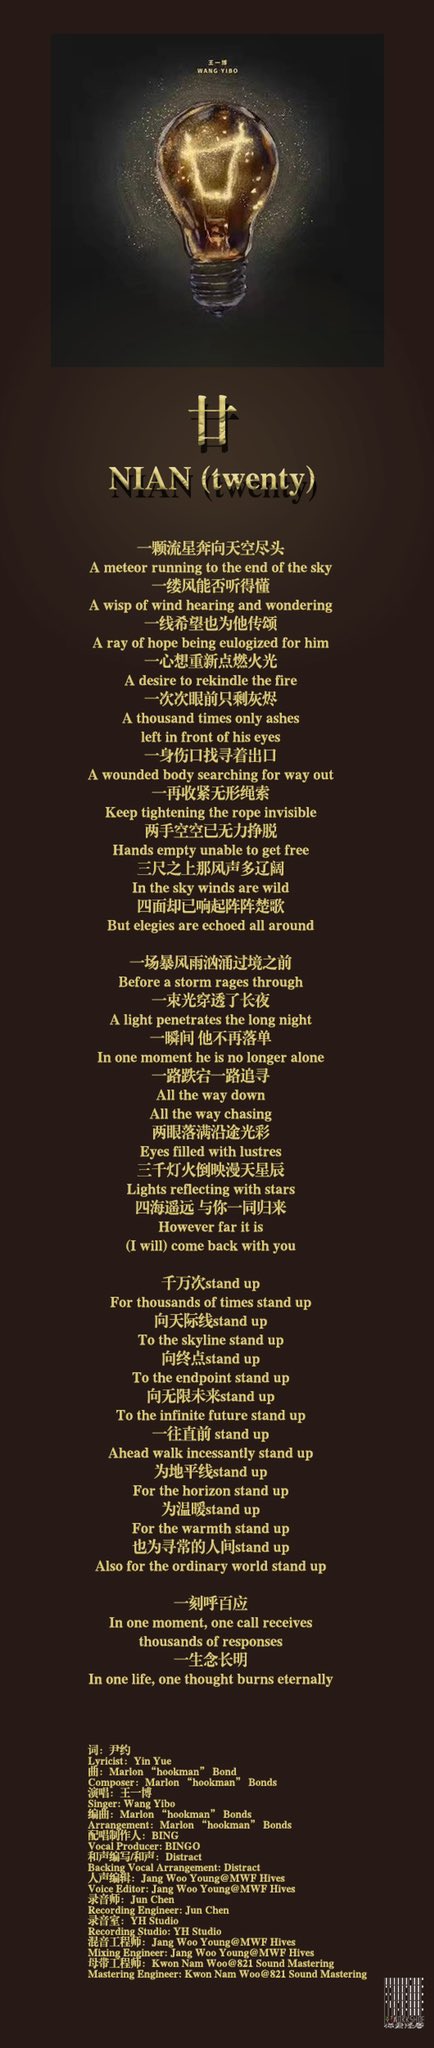 User Youth - The Legend of Zelda: Breath of the Wild: lyrics and